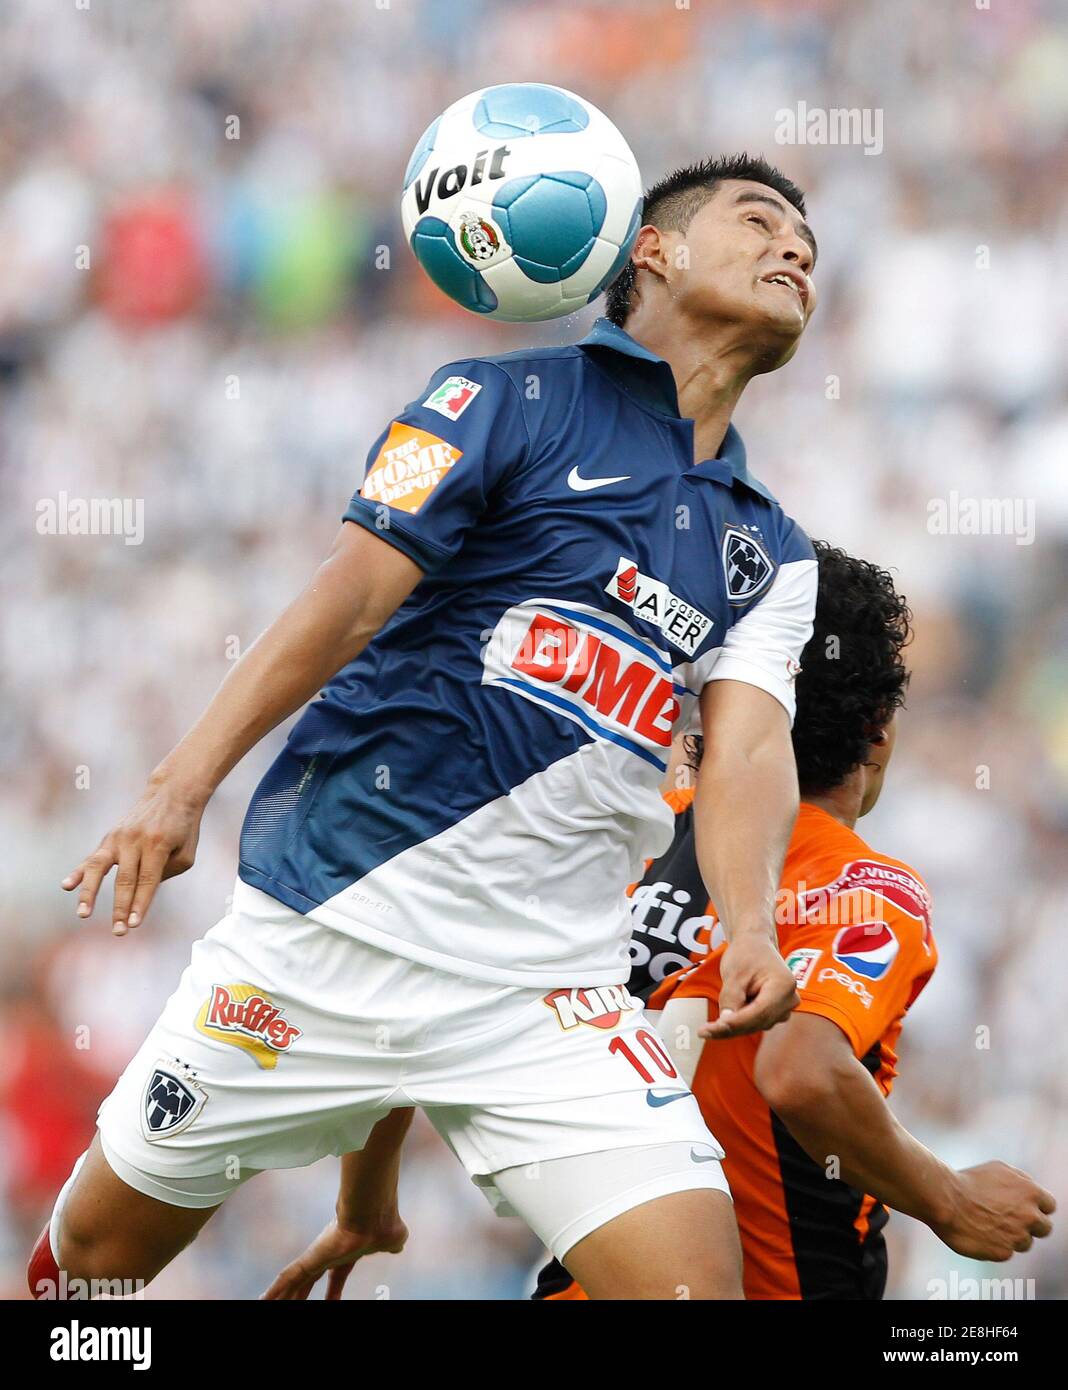 Monterrey's Osvaldo Martinez (L) battles for the ball with Pachuca's Edy Brambila during their Mexican league quarterfinal soccer match at the Tecnologico stadium in Monterrey May 8, 2010. REUTERS/Tomas Bravo (MEXICO - Tags: SPORT SOCCER) Stock Photo